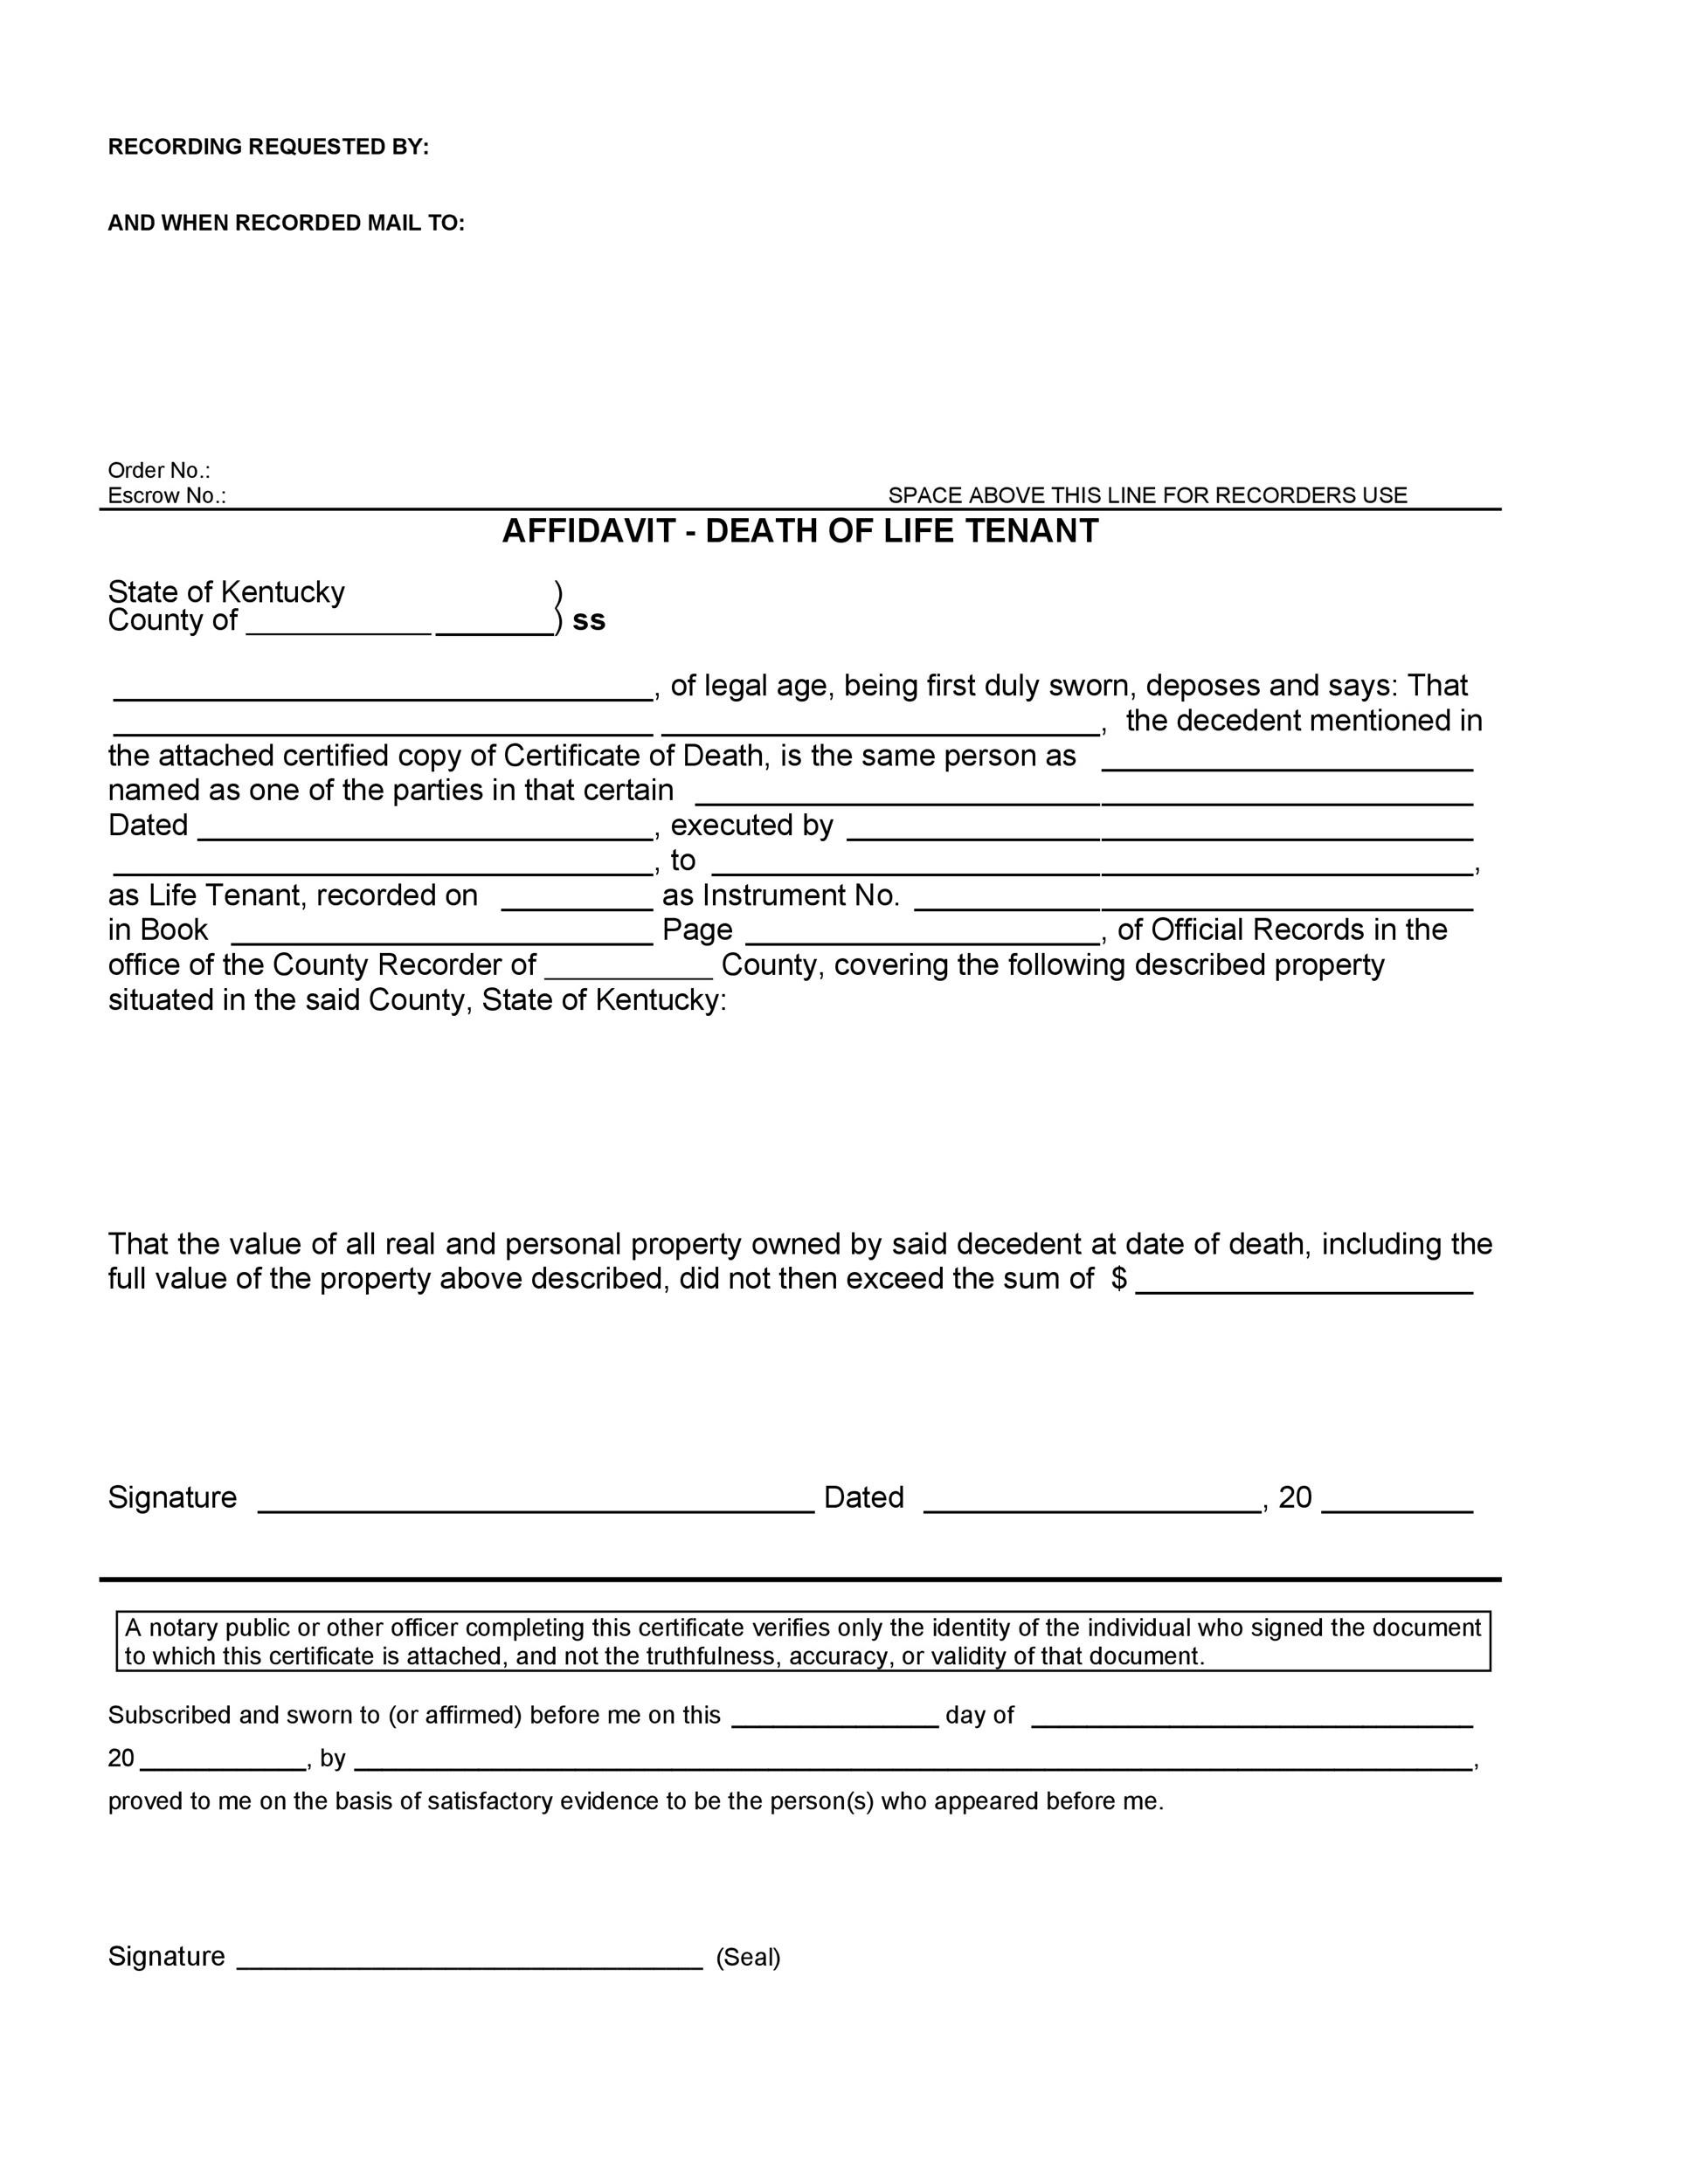 50-editable-affidavit-of-death-forms-all-states-template-lab